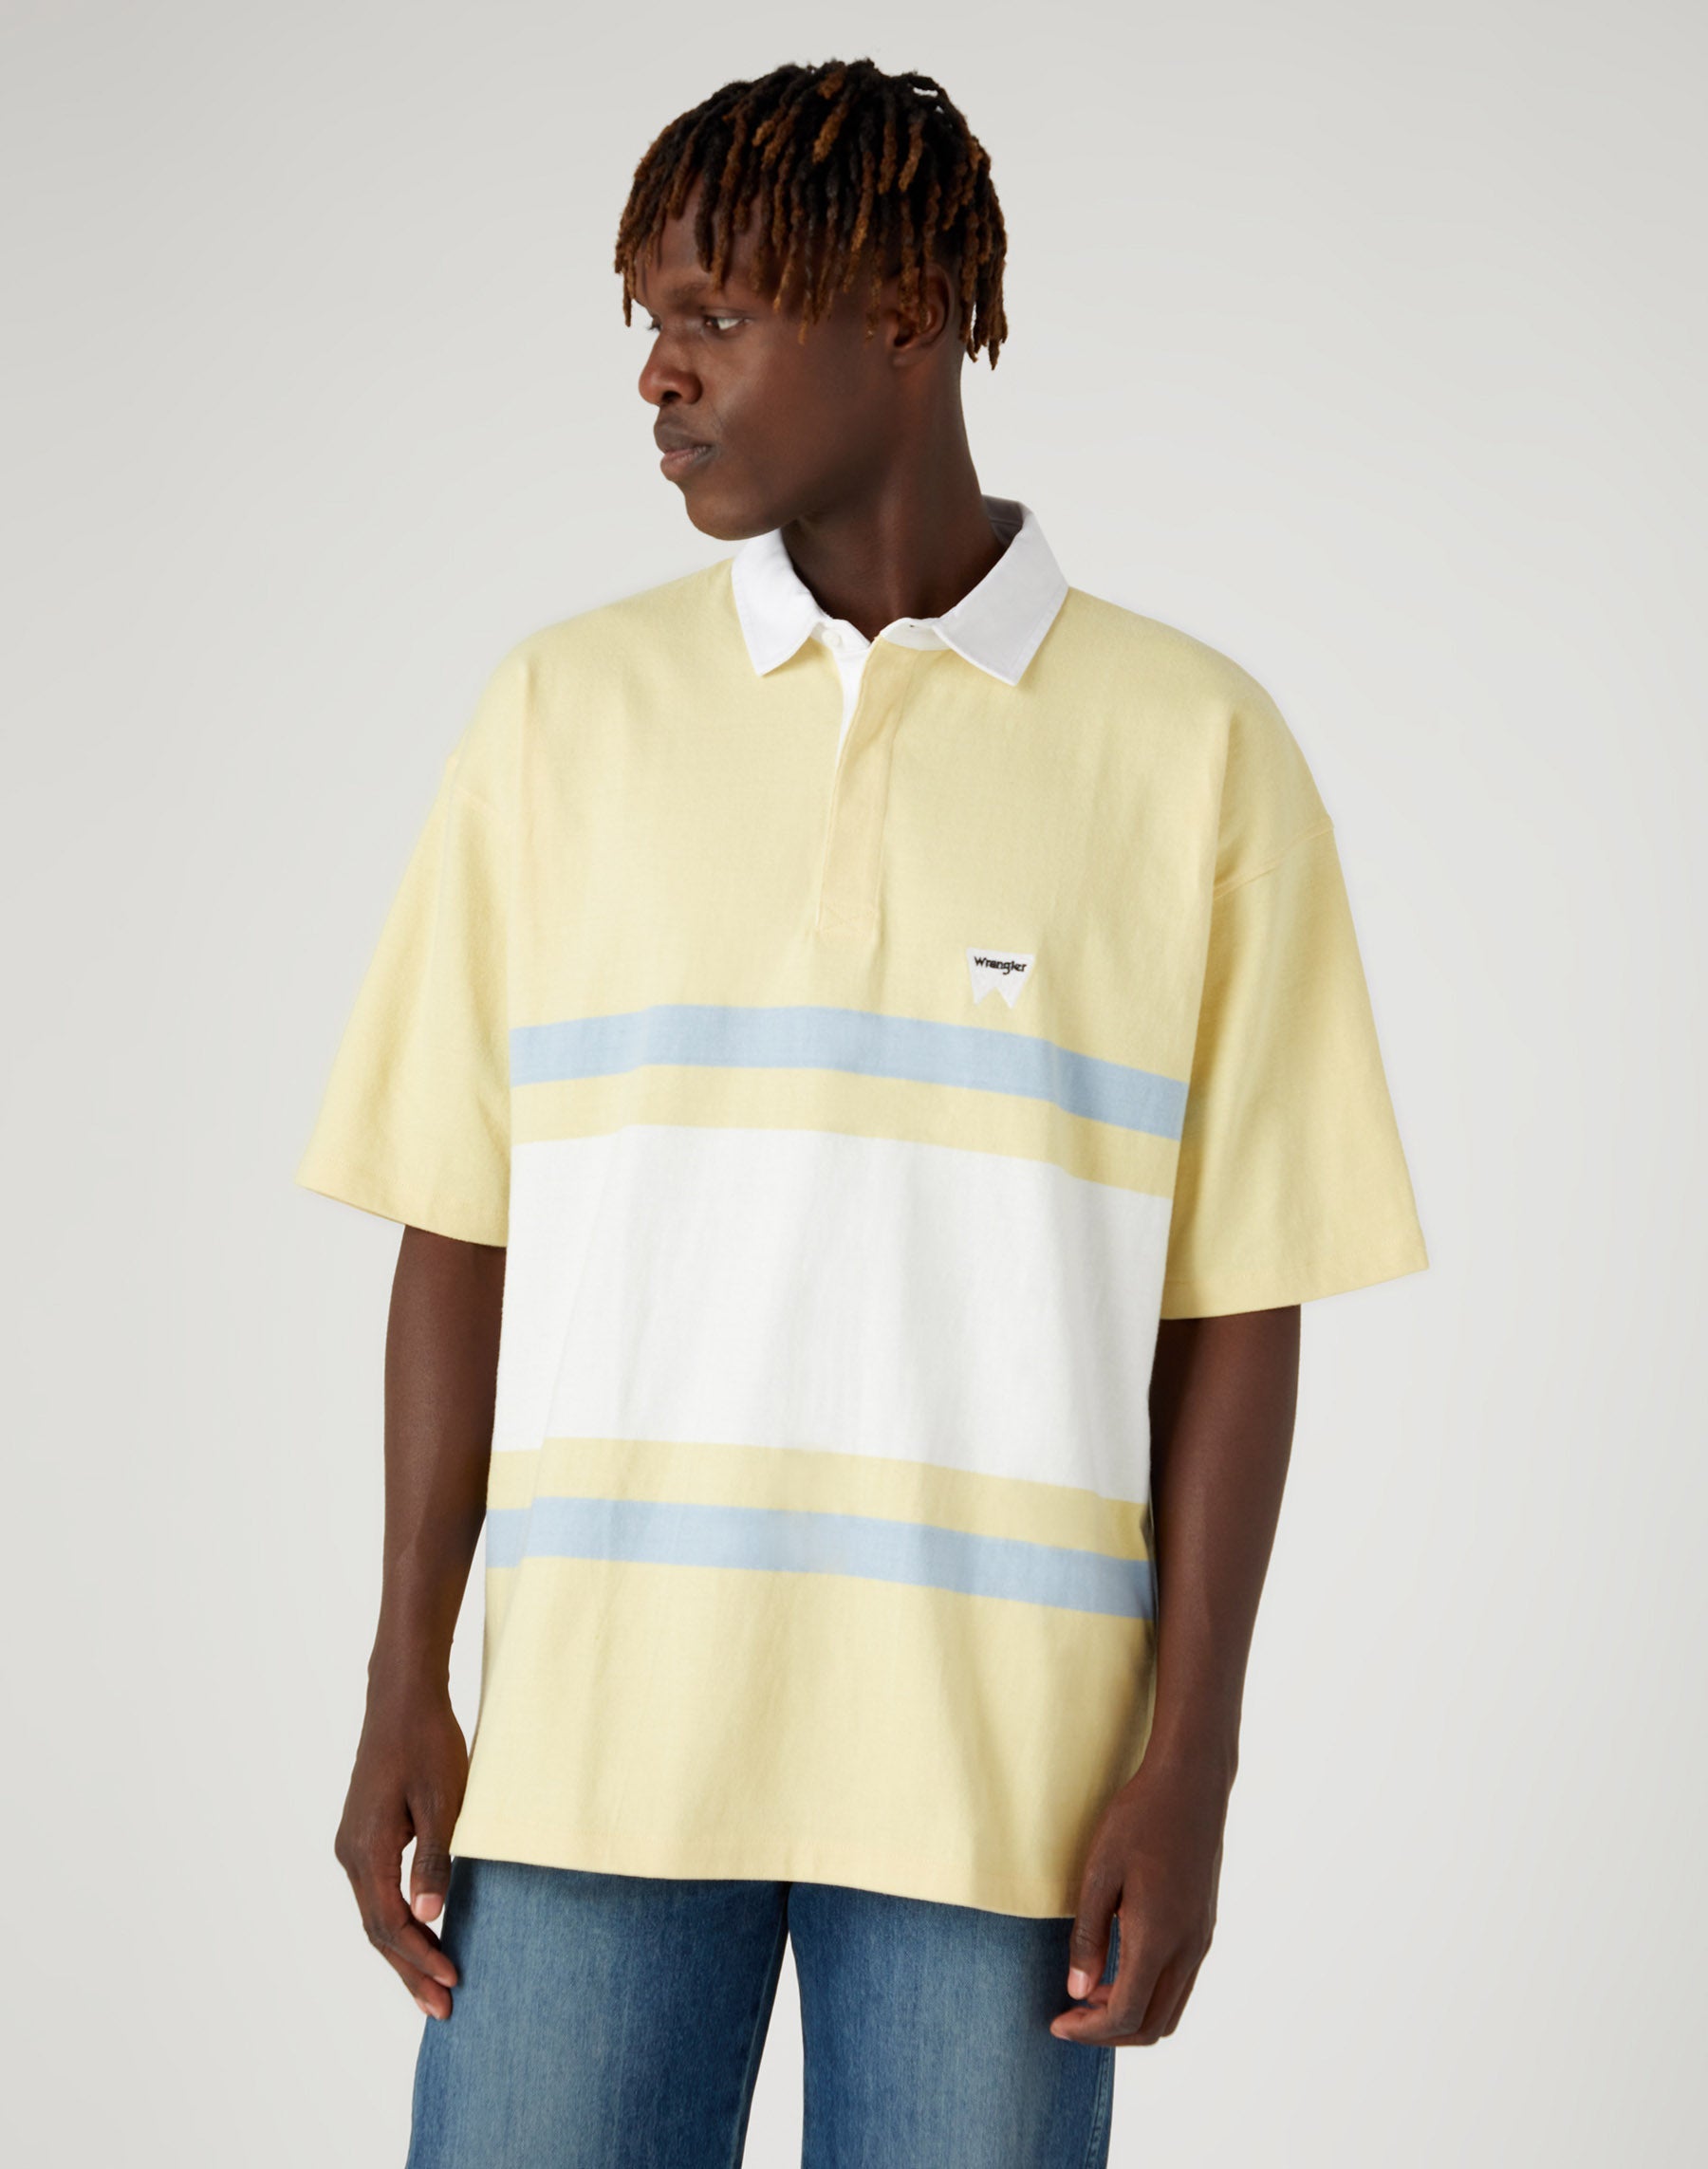 Rugby Polo Shirt in Pineapple Slice Polos Wrangler   